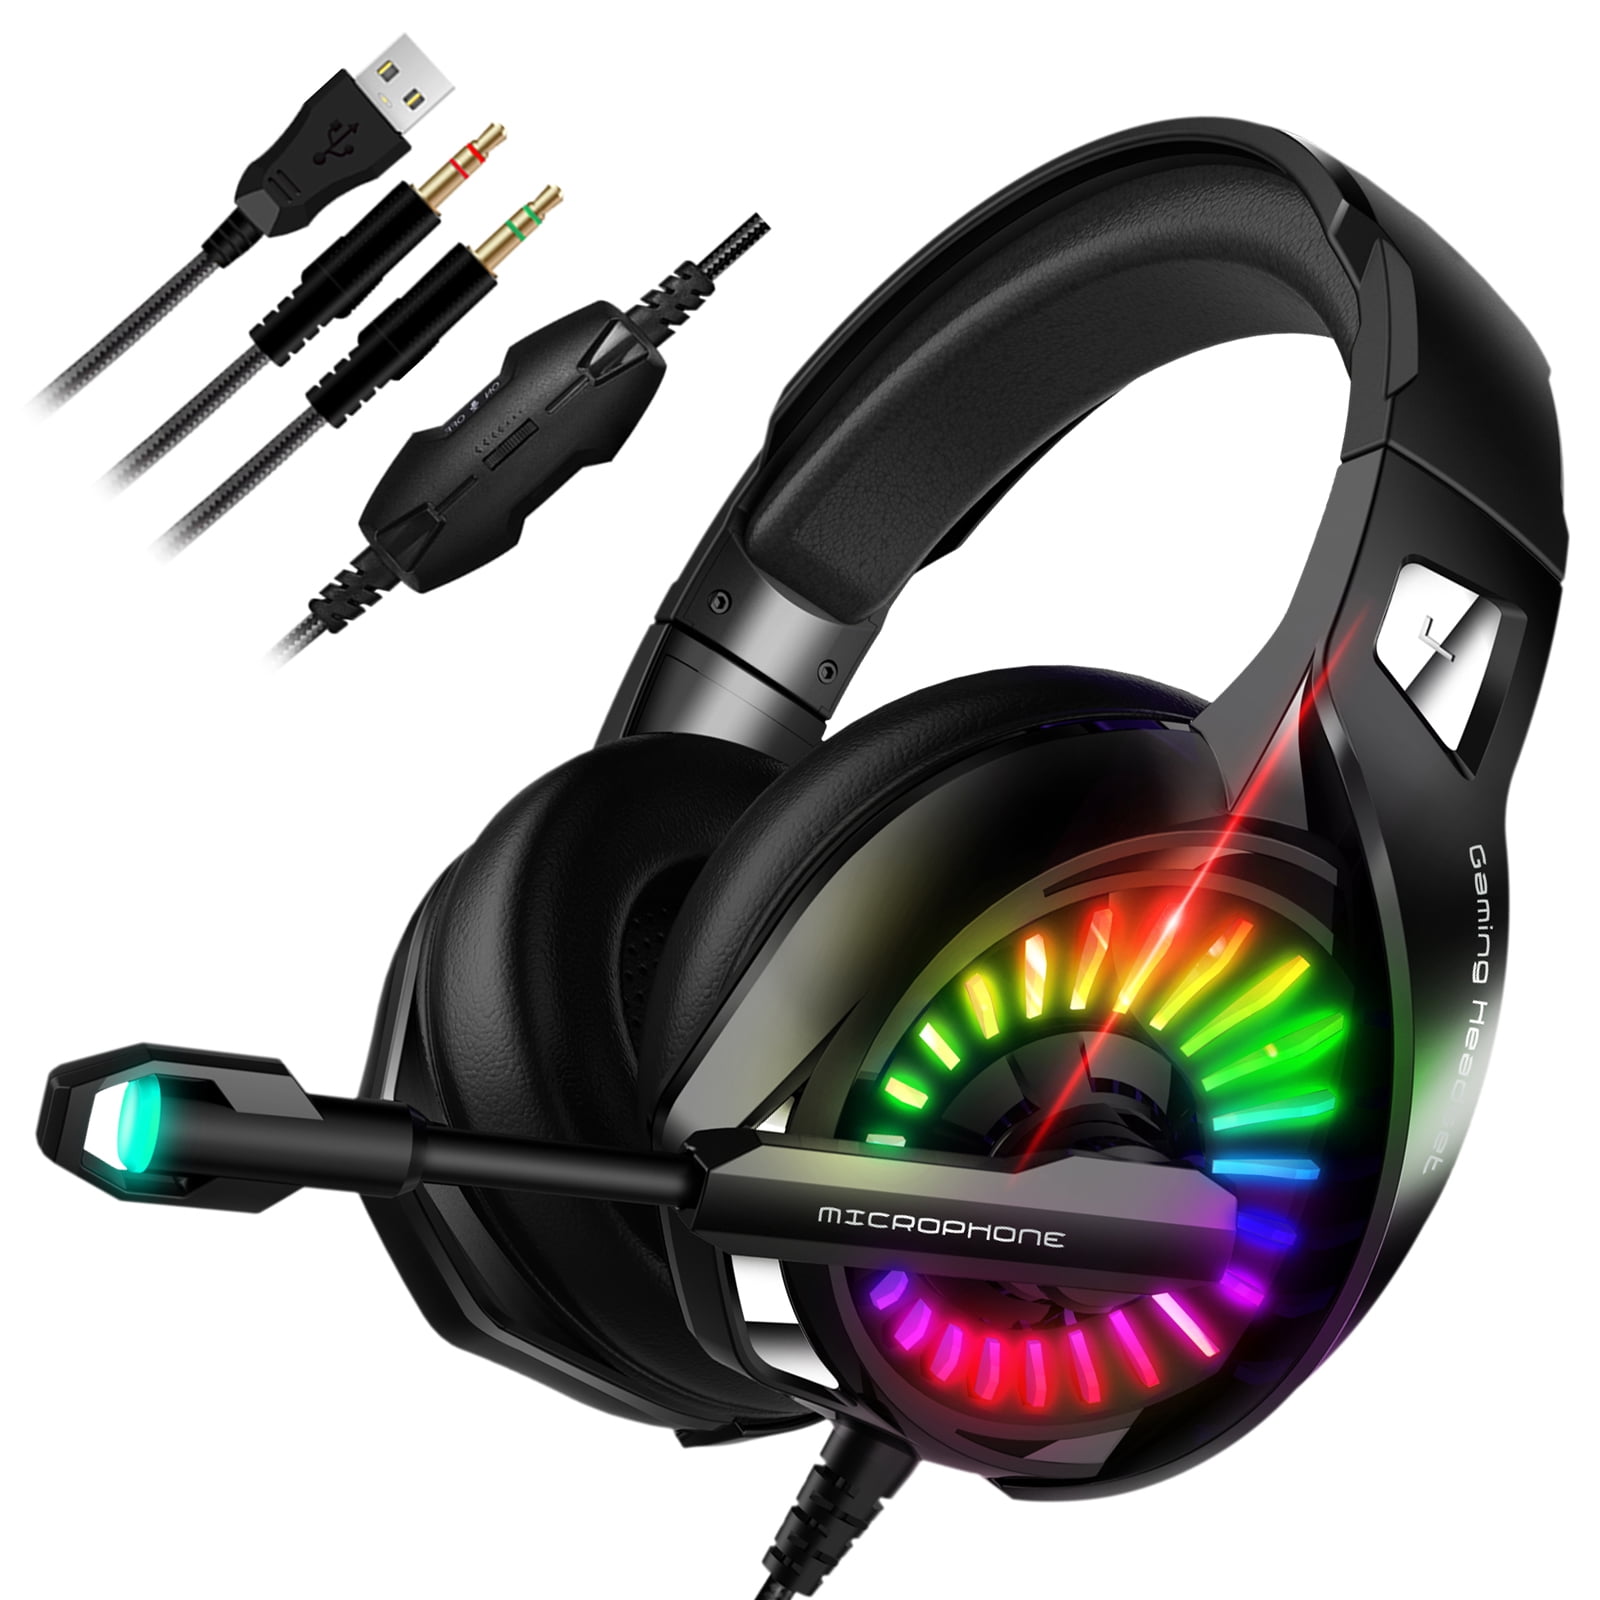 3.5mm Gaming Headset MIC LED Headphones Surround for PC Mac Laptop PS4 Xbox One